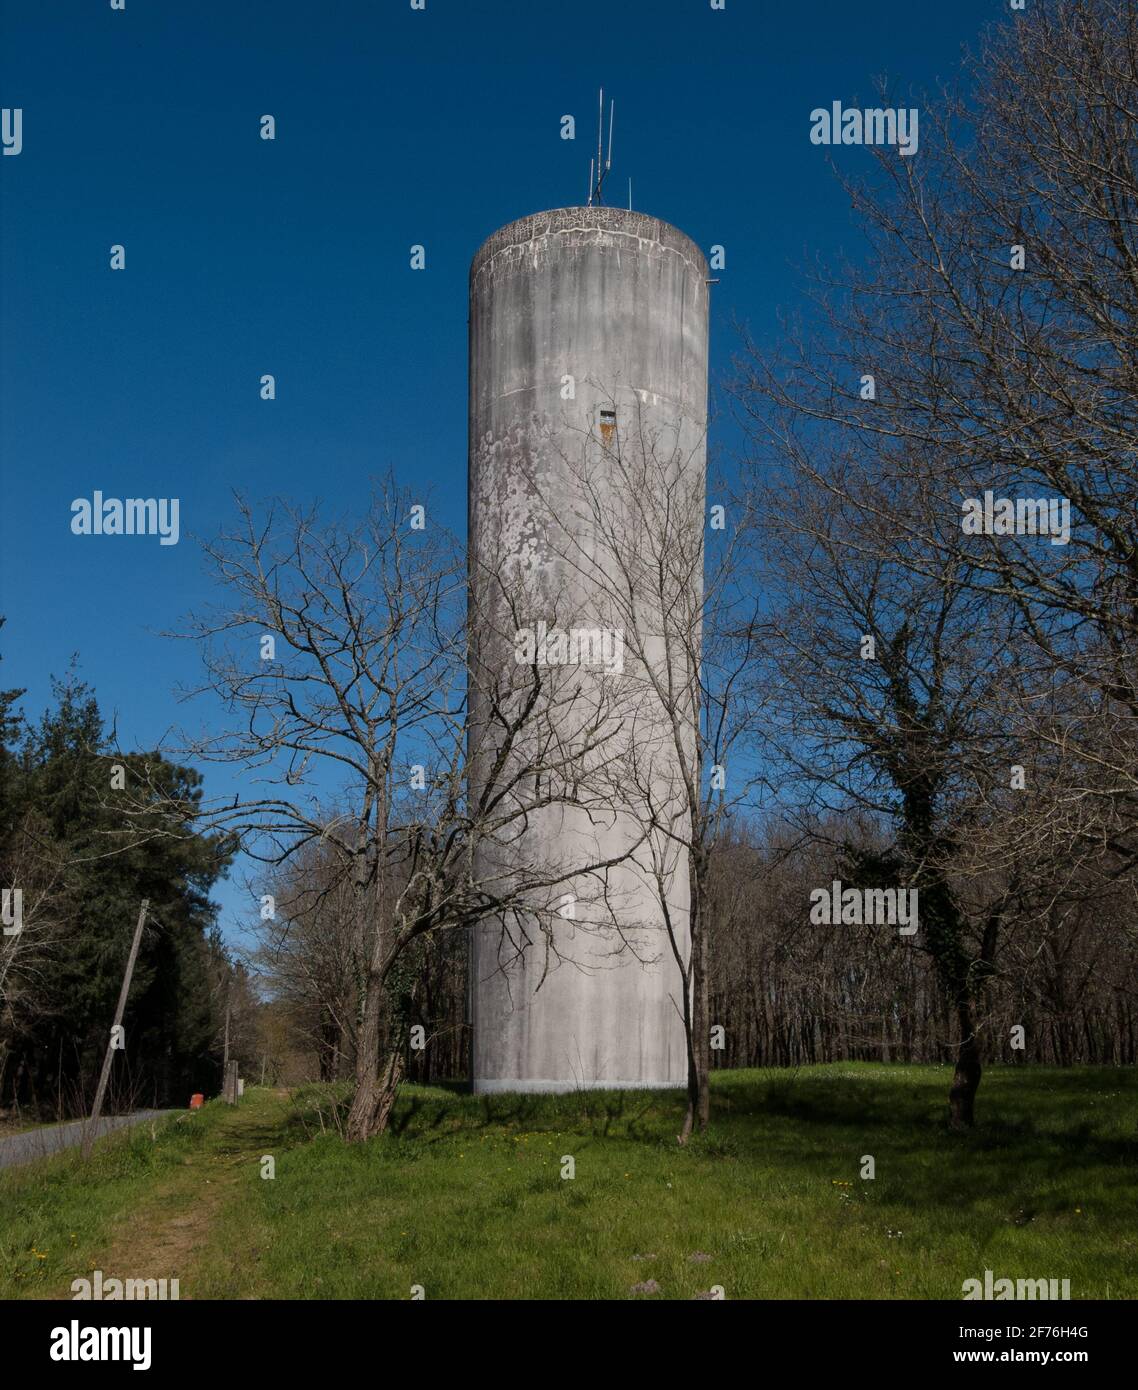 WATER TOWER IN THE COUNTRY SIDE - WATER RESERVOIR - CHATEAU D'EAU - AQUITAINE FRANCE © Frédéric BEAUMONT Stock Photo